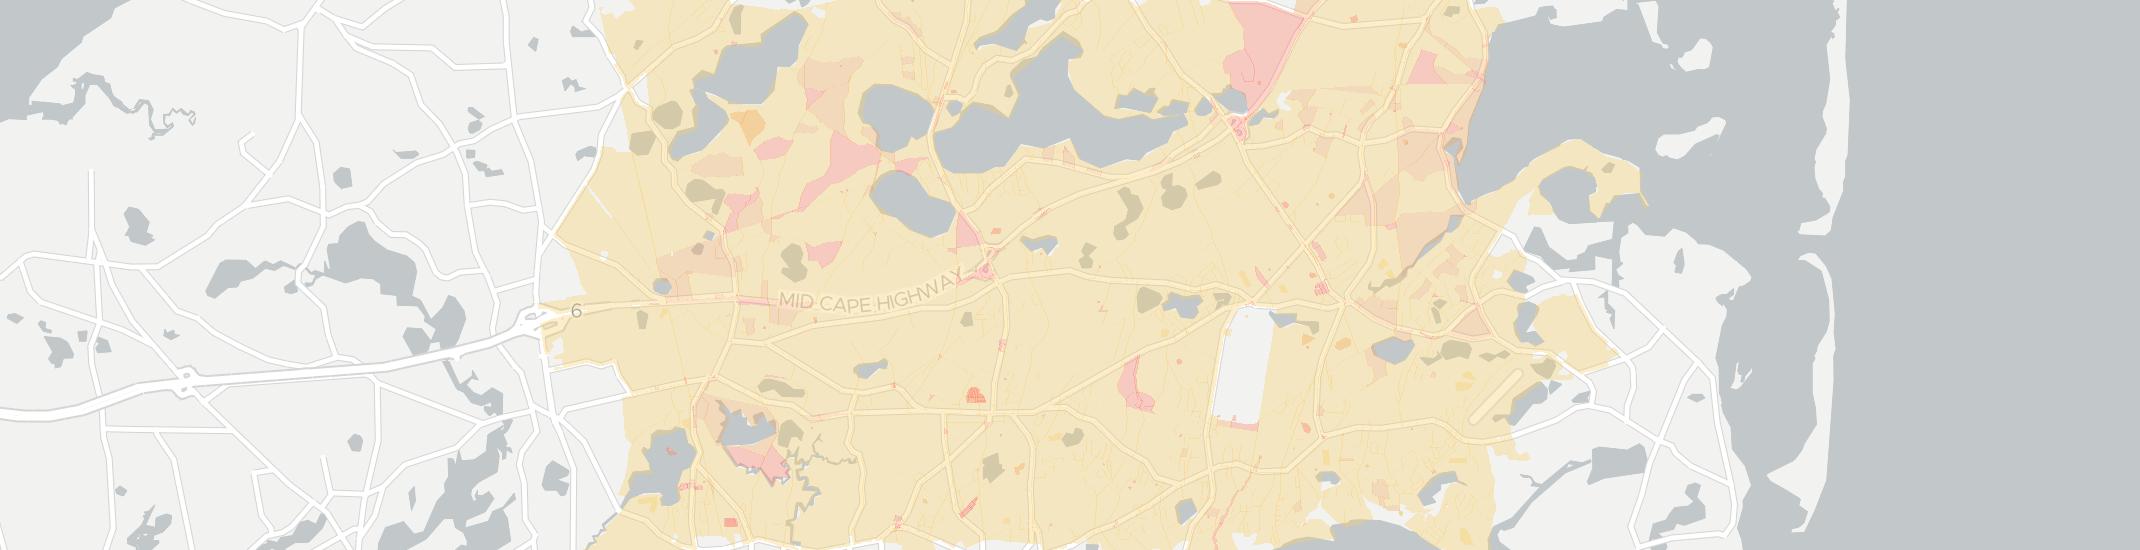 Harwich Internet Competition Map. Click for interactive map